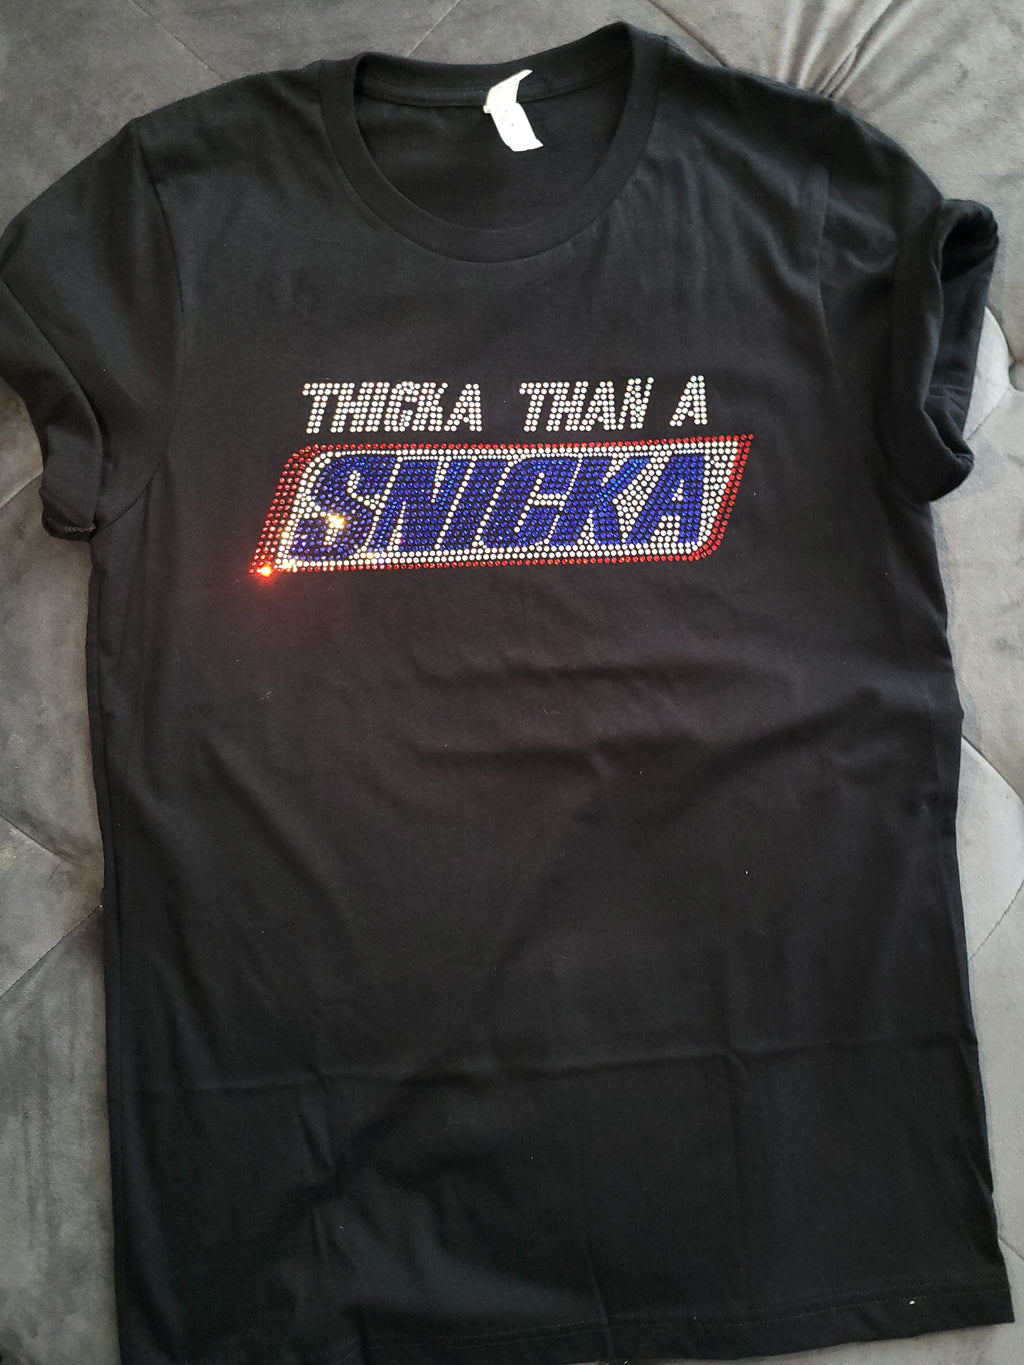 "THICKA THAN A SNICKA" Bling Tee; PRE-ORDER YOURS UNTIL MONDAY 8/28! *All orders will ship the following Tues. 9/5